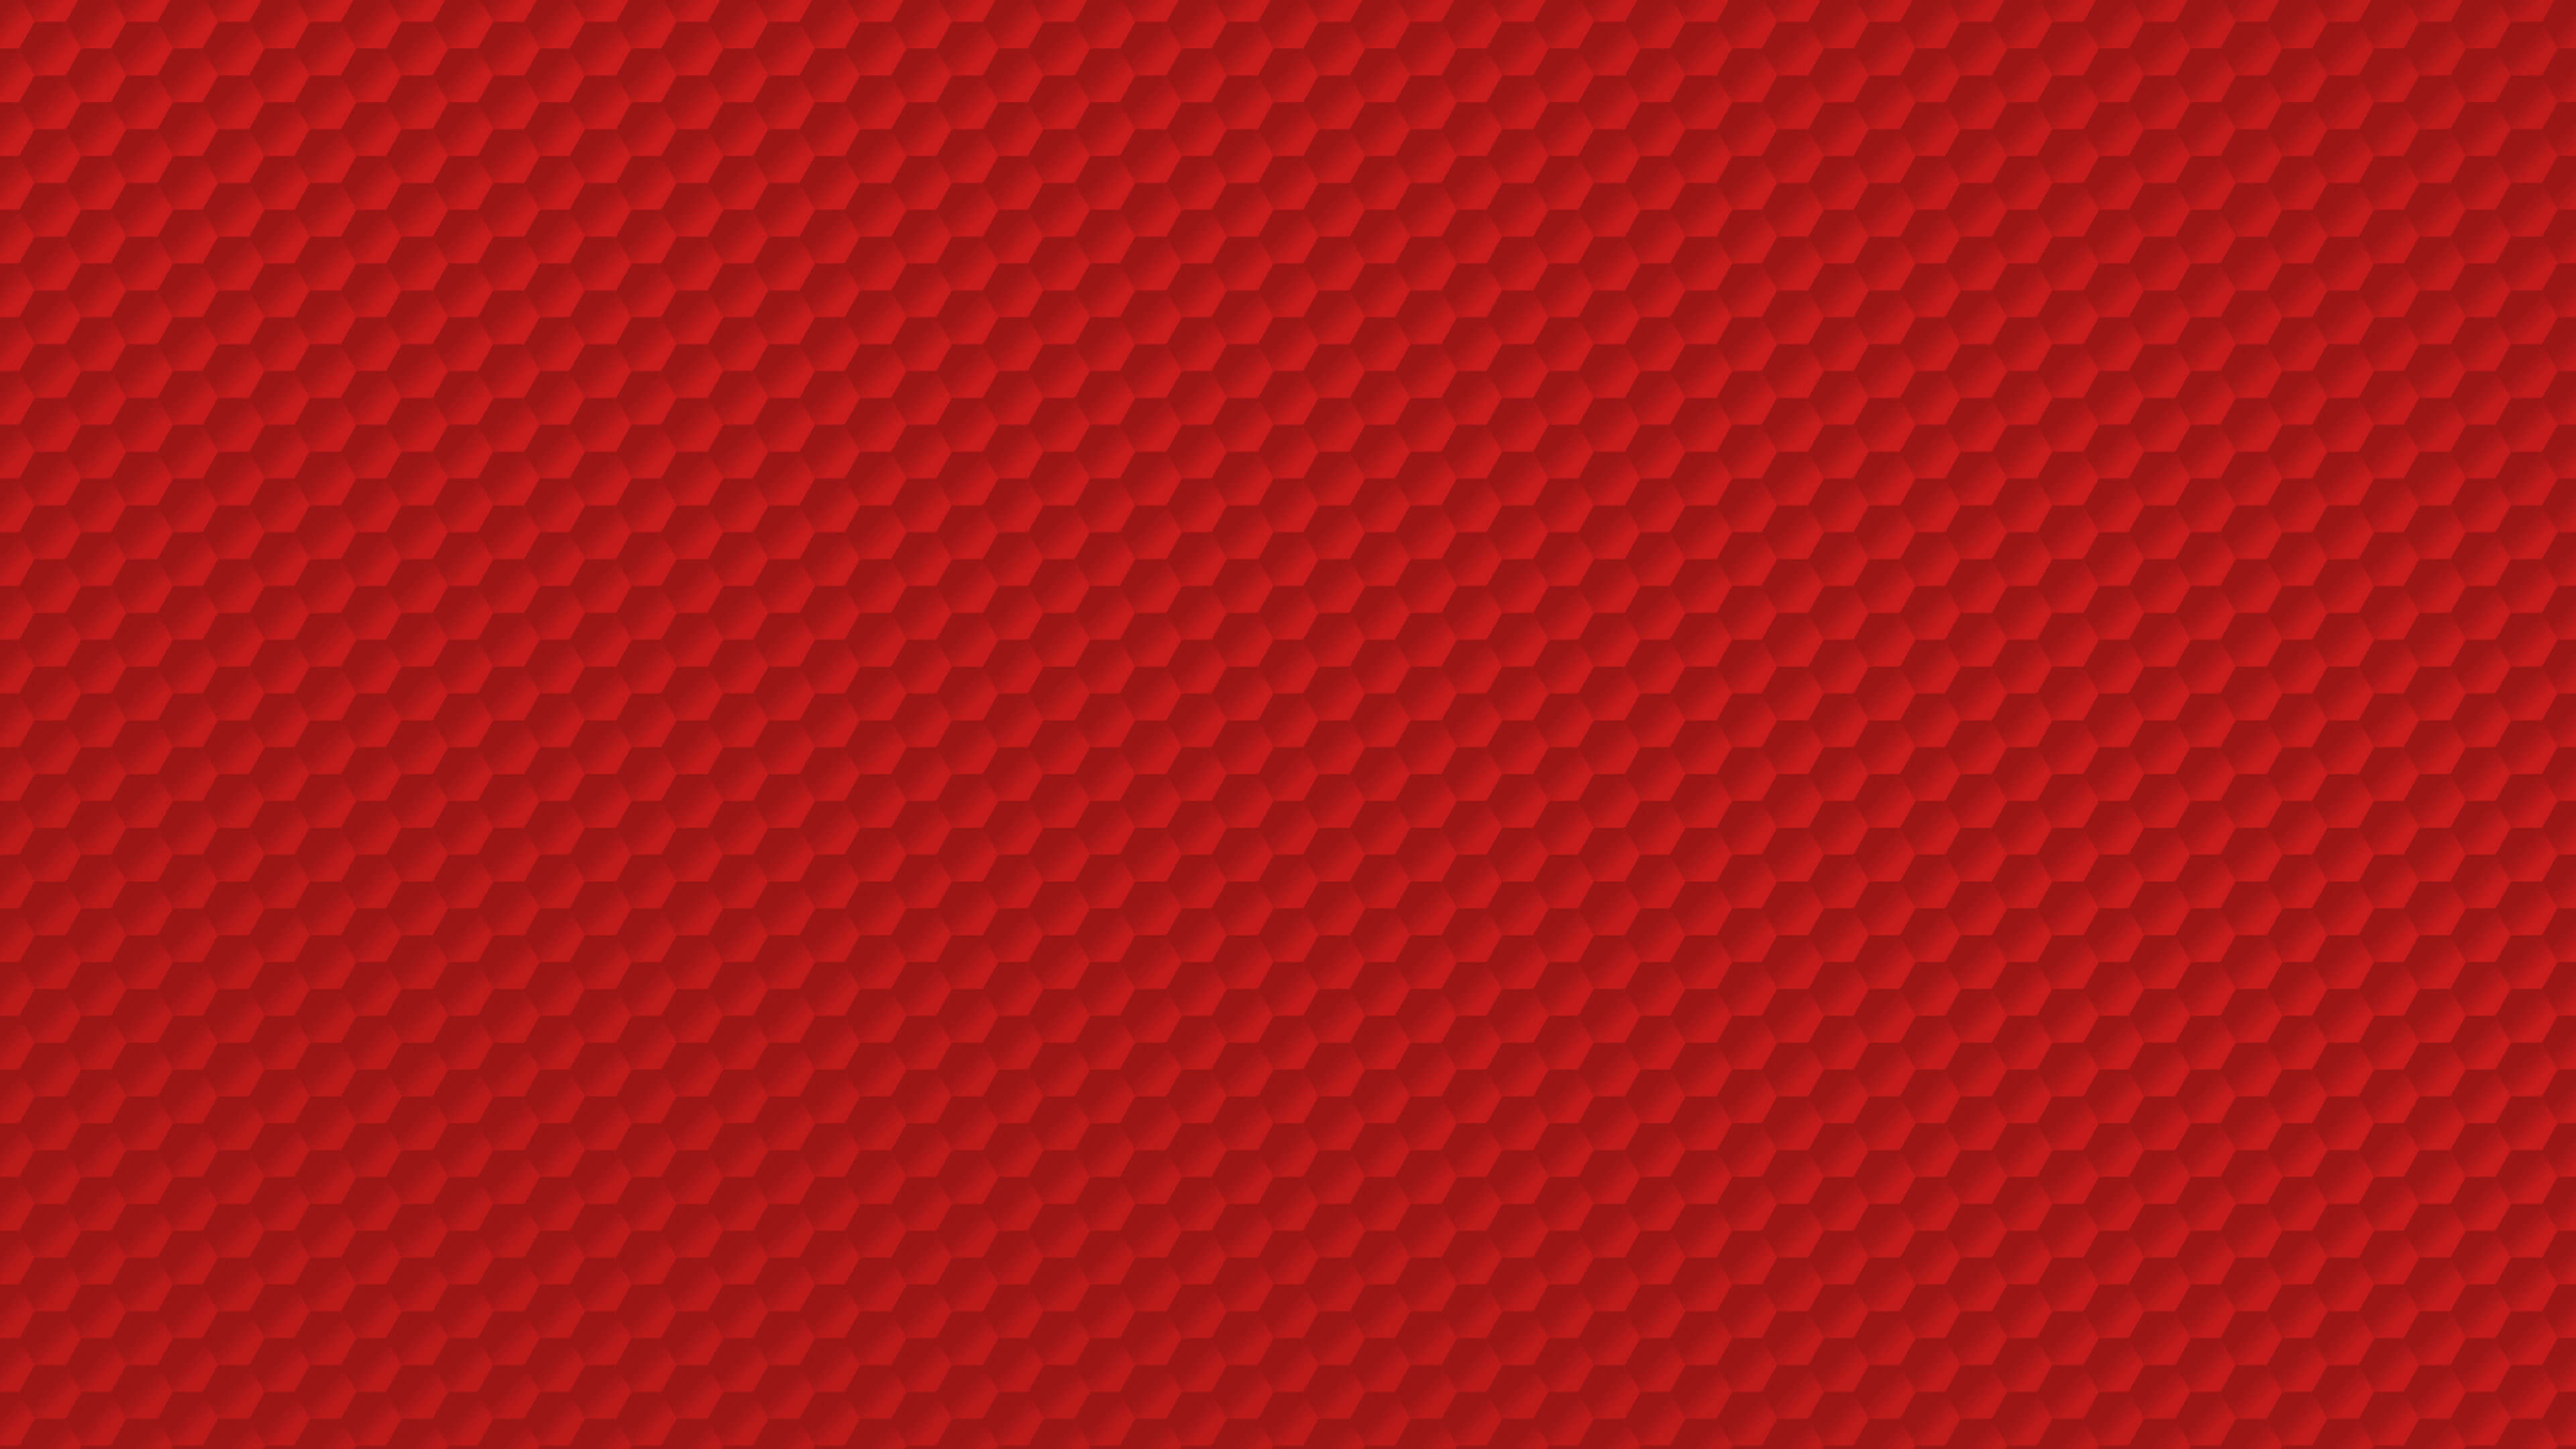 3840x2160 Red-Honeycomb-Pattern-4K-Wallpapers | Circle of Friends Animal Society, Inc